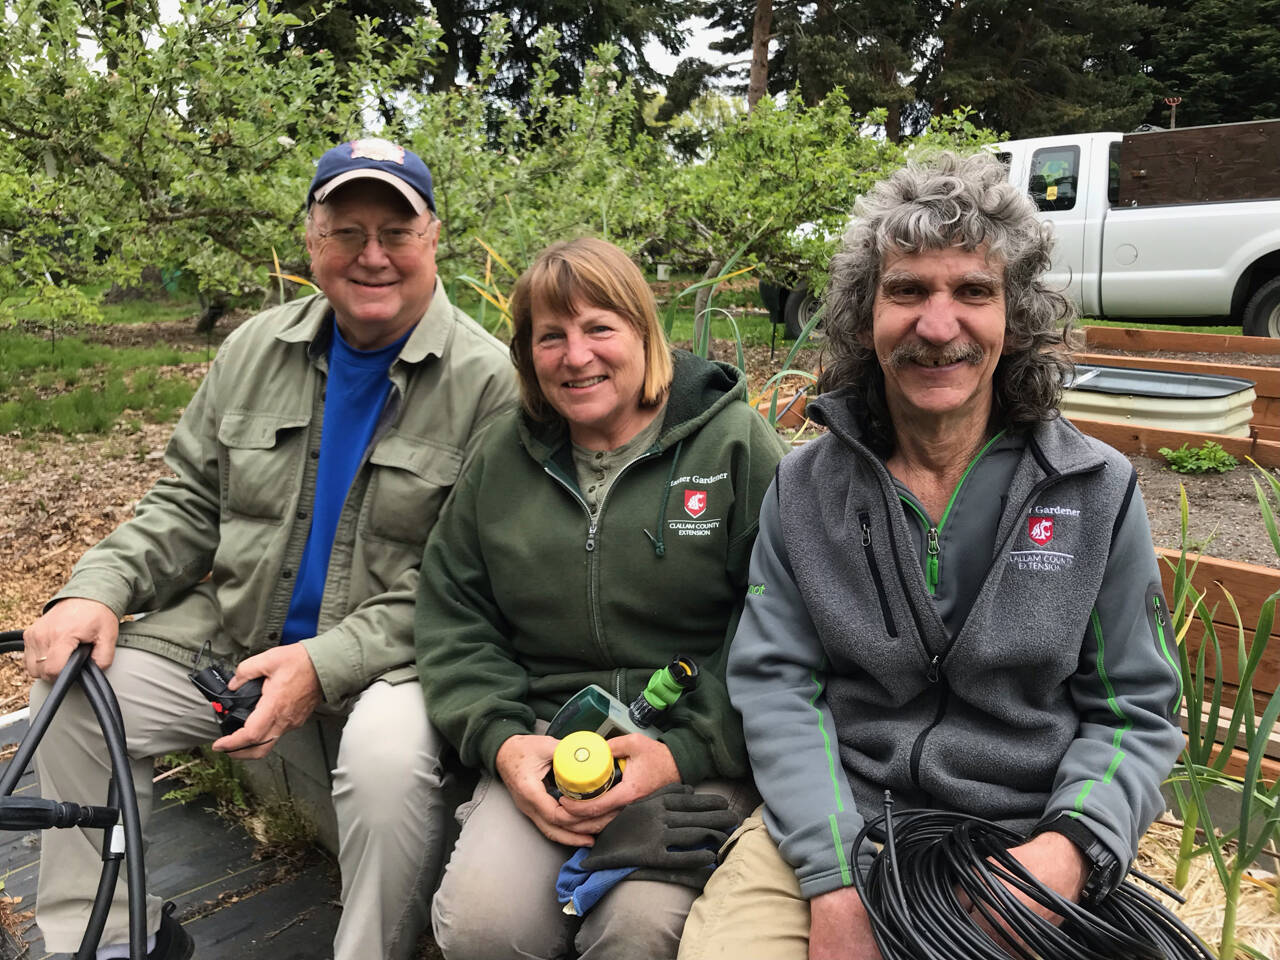 Clallam County Master Gardeners Roger Steinert, Susan Kalmar and Tom del Hotal share tips about watering the garden and landscape starting at 10:30 a.m. Saturday, June 4, at the Master Gardener Demonstration Garden, 2711 Woodcock Road, in Sequim. Submitted photo